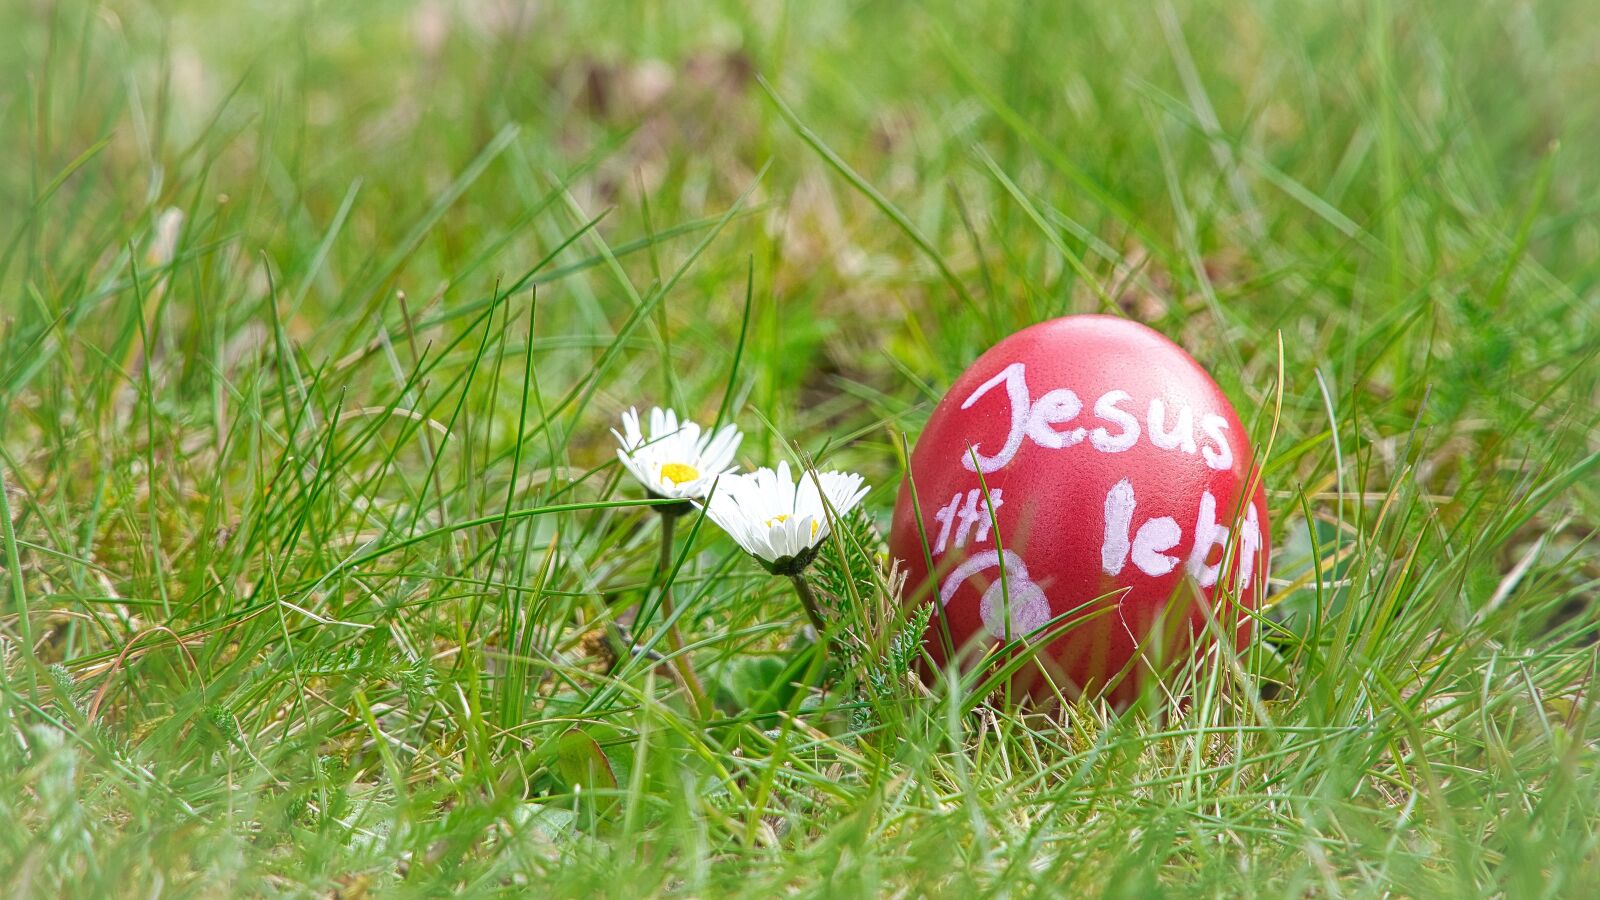 Sony a6300 sample photo. Easter, egg, jesus photography